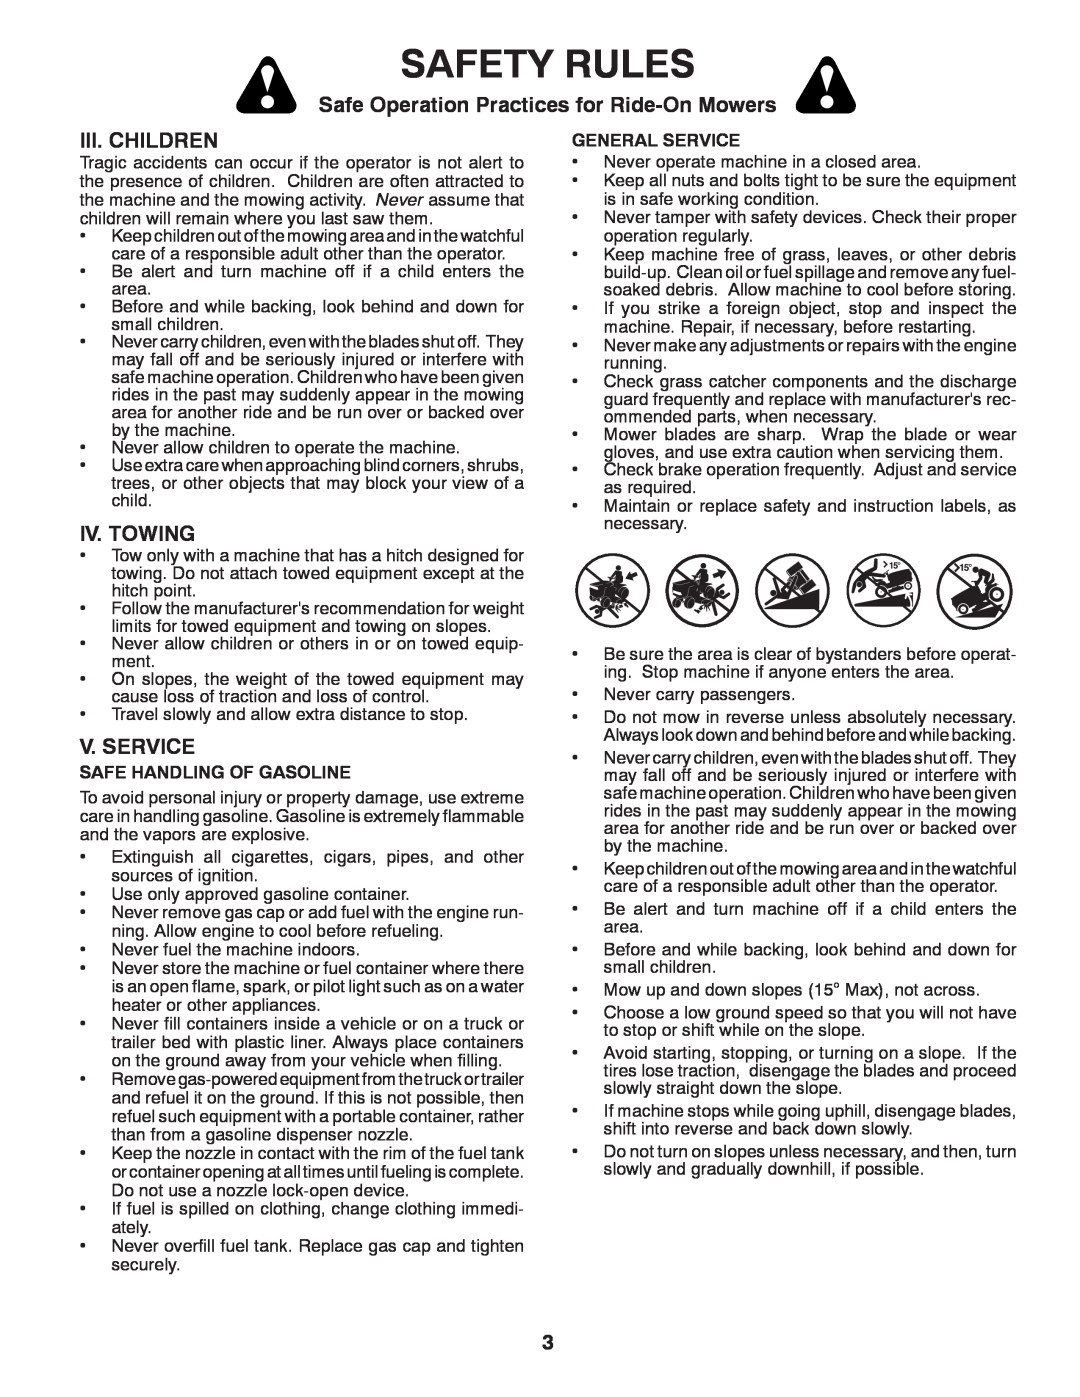 Poulan 96042010700, 430094 Safety Rules, Safe Operation Practices for Ride-OnMowers, Iii. Children, Iv. Towing, V. Service 